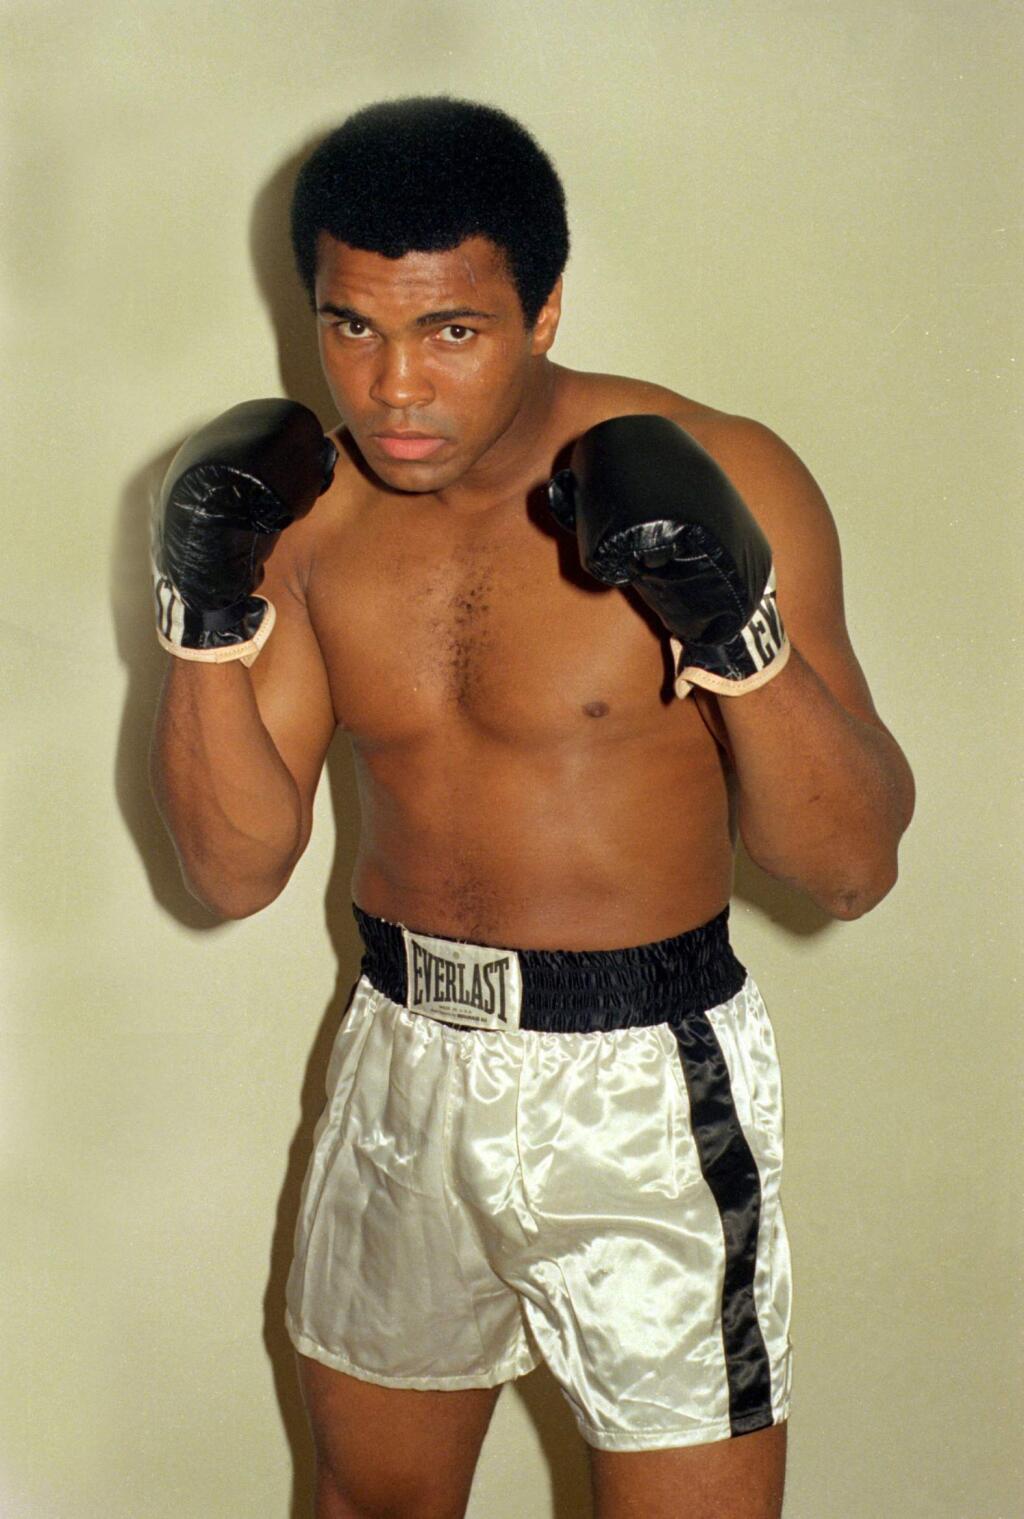 FILE - This is an Oct. 9, 1974, file photo showing Muhammad Ali. Ali, the magnificent heavyweight champion whose fast fists and irrepressible personality transcended sports and captivated the world, has died according to a statement released by his family Friday, June 3, 2016. He was 74. (AP Photo/Ross D. Franklin, File)(AP Photo/FIle)